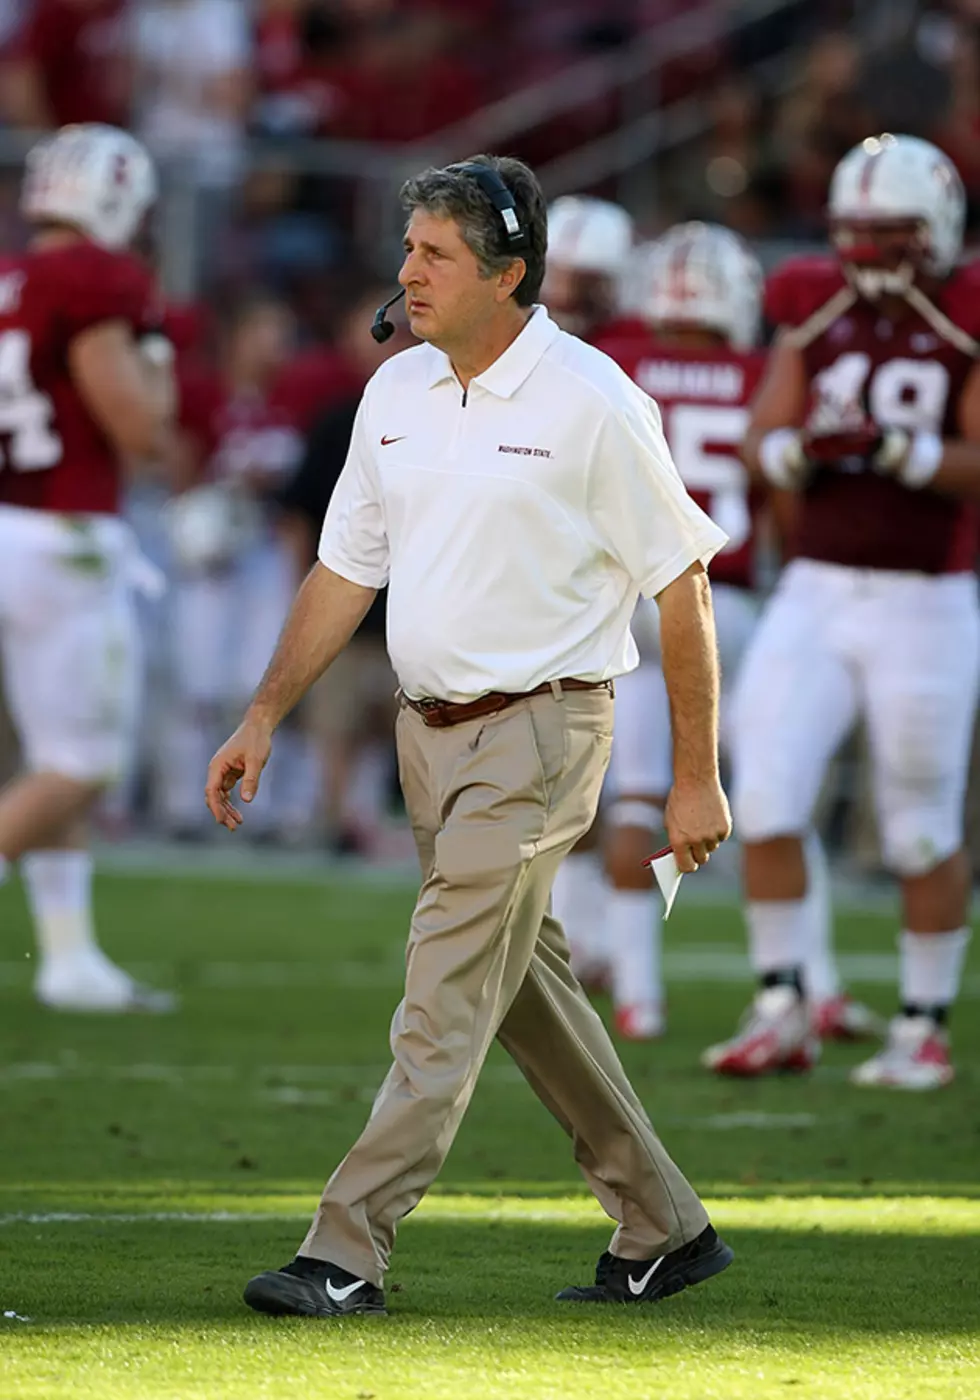 Mike Leach Does It Again With a Great Rant About His Soft Players